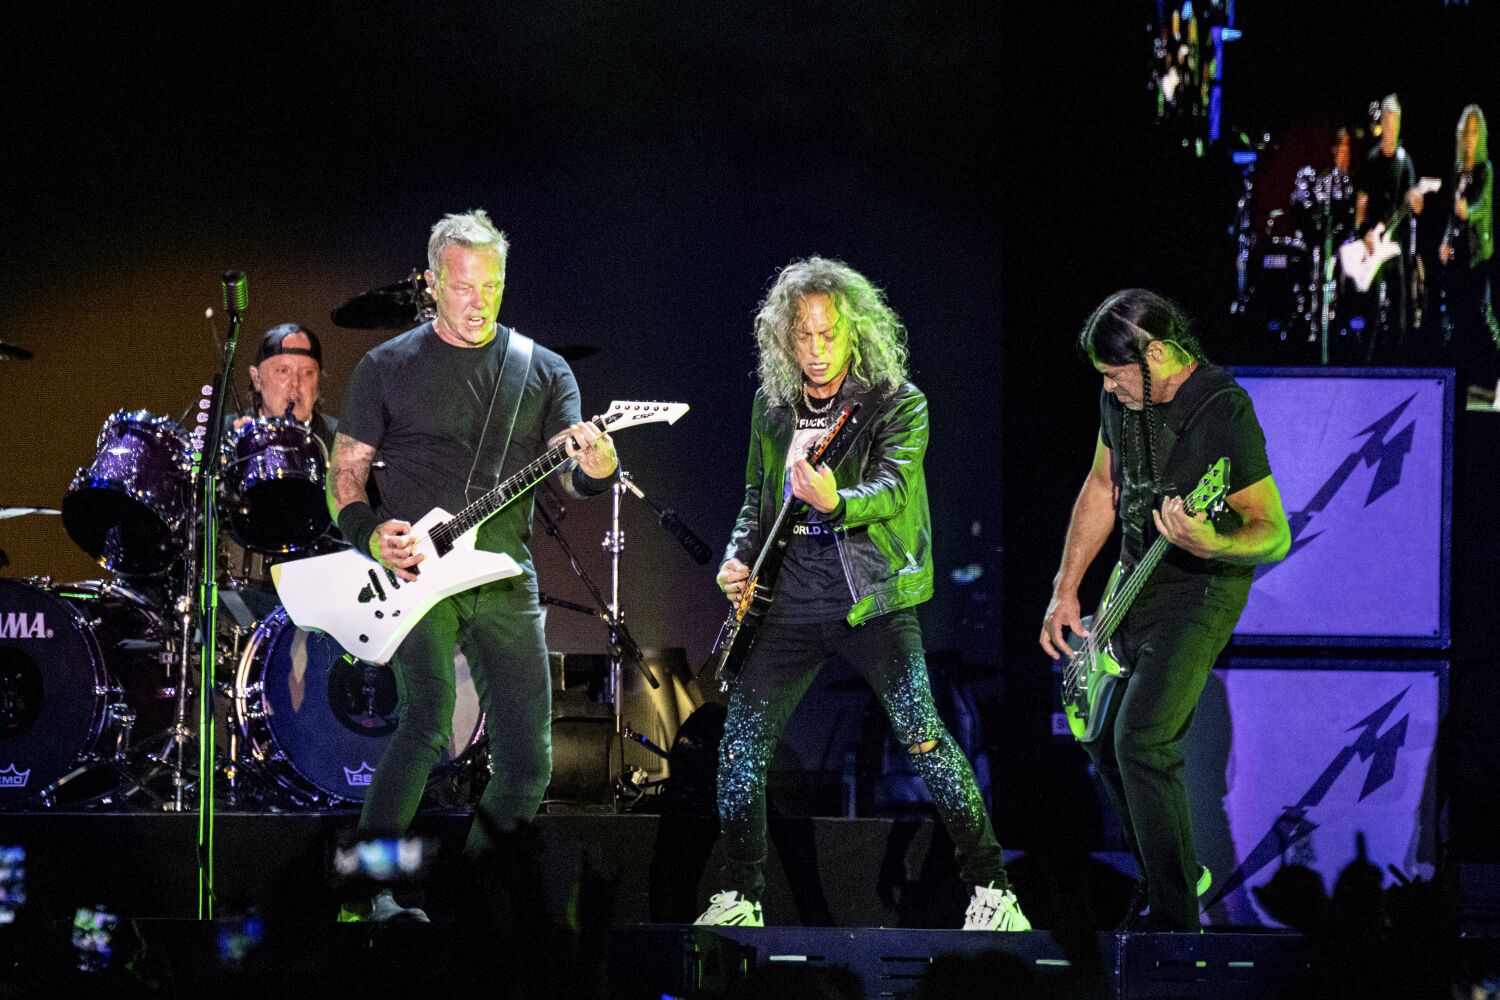 Enter the band, man: Metallica just announced its first marching band competition